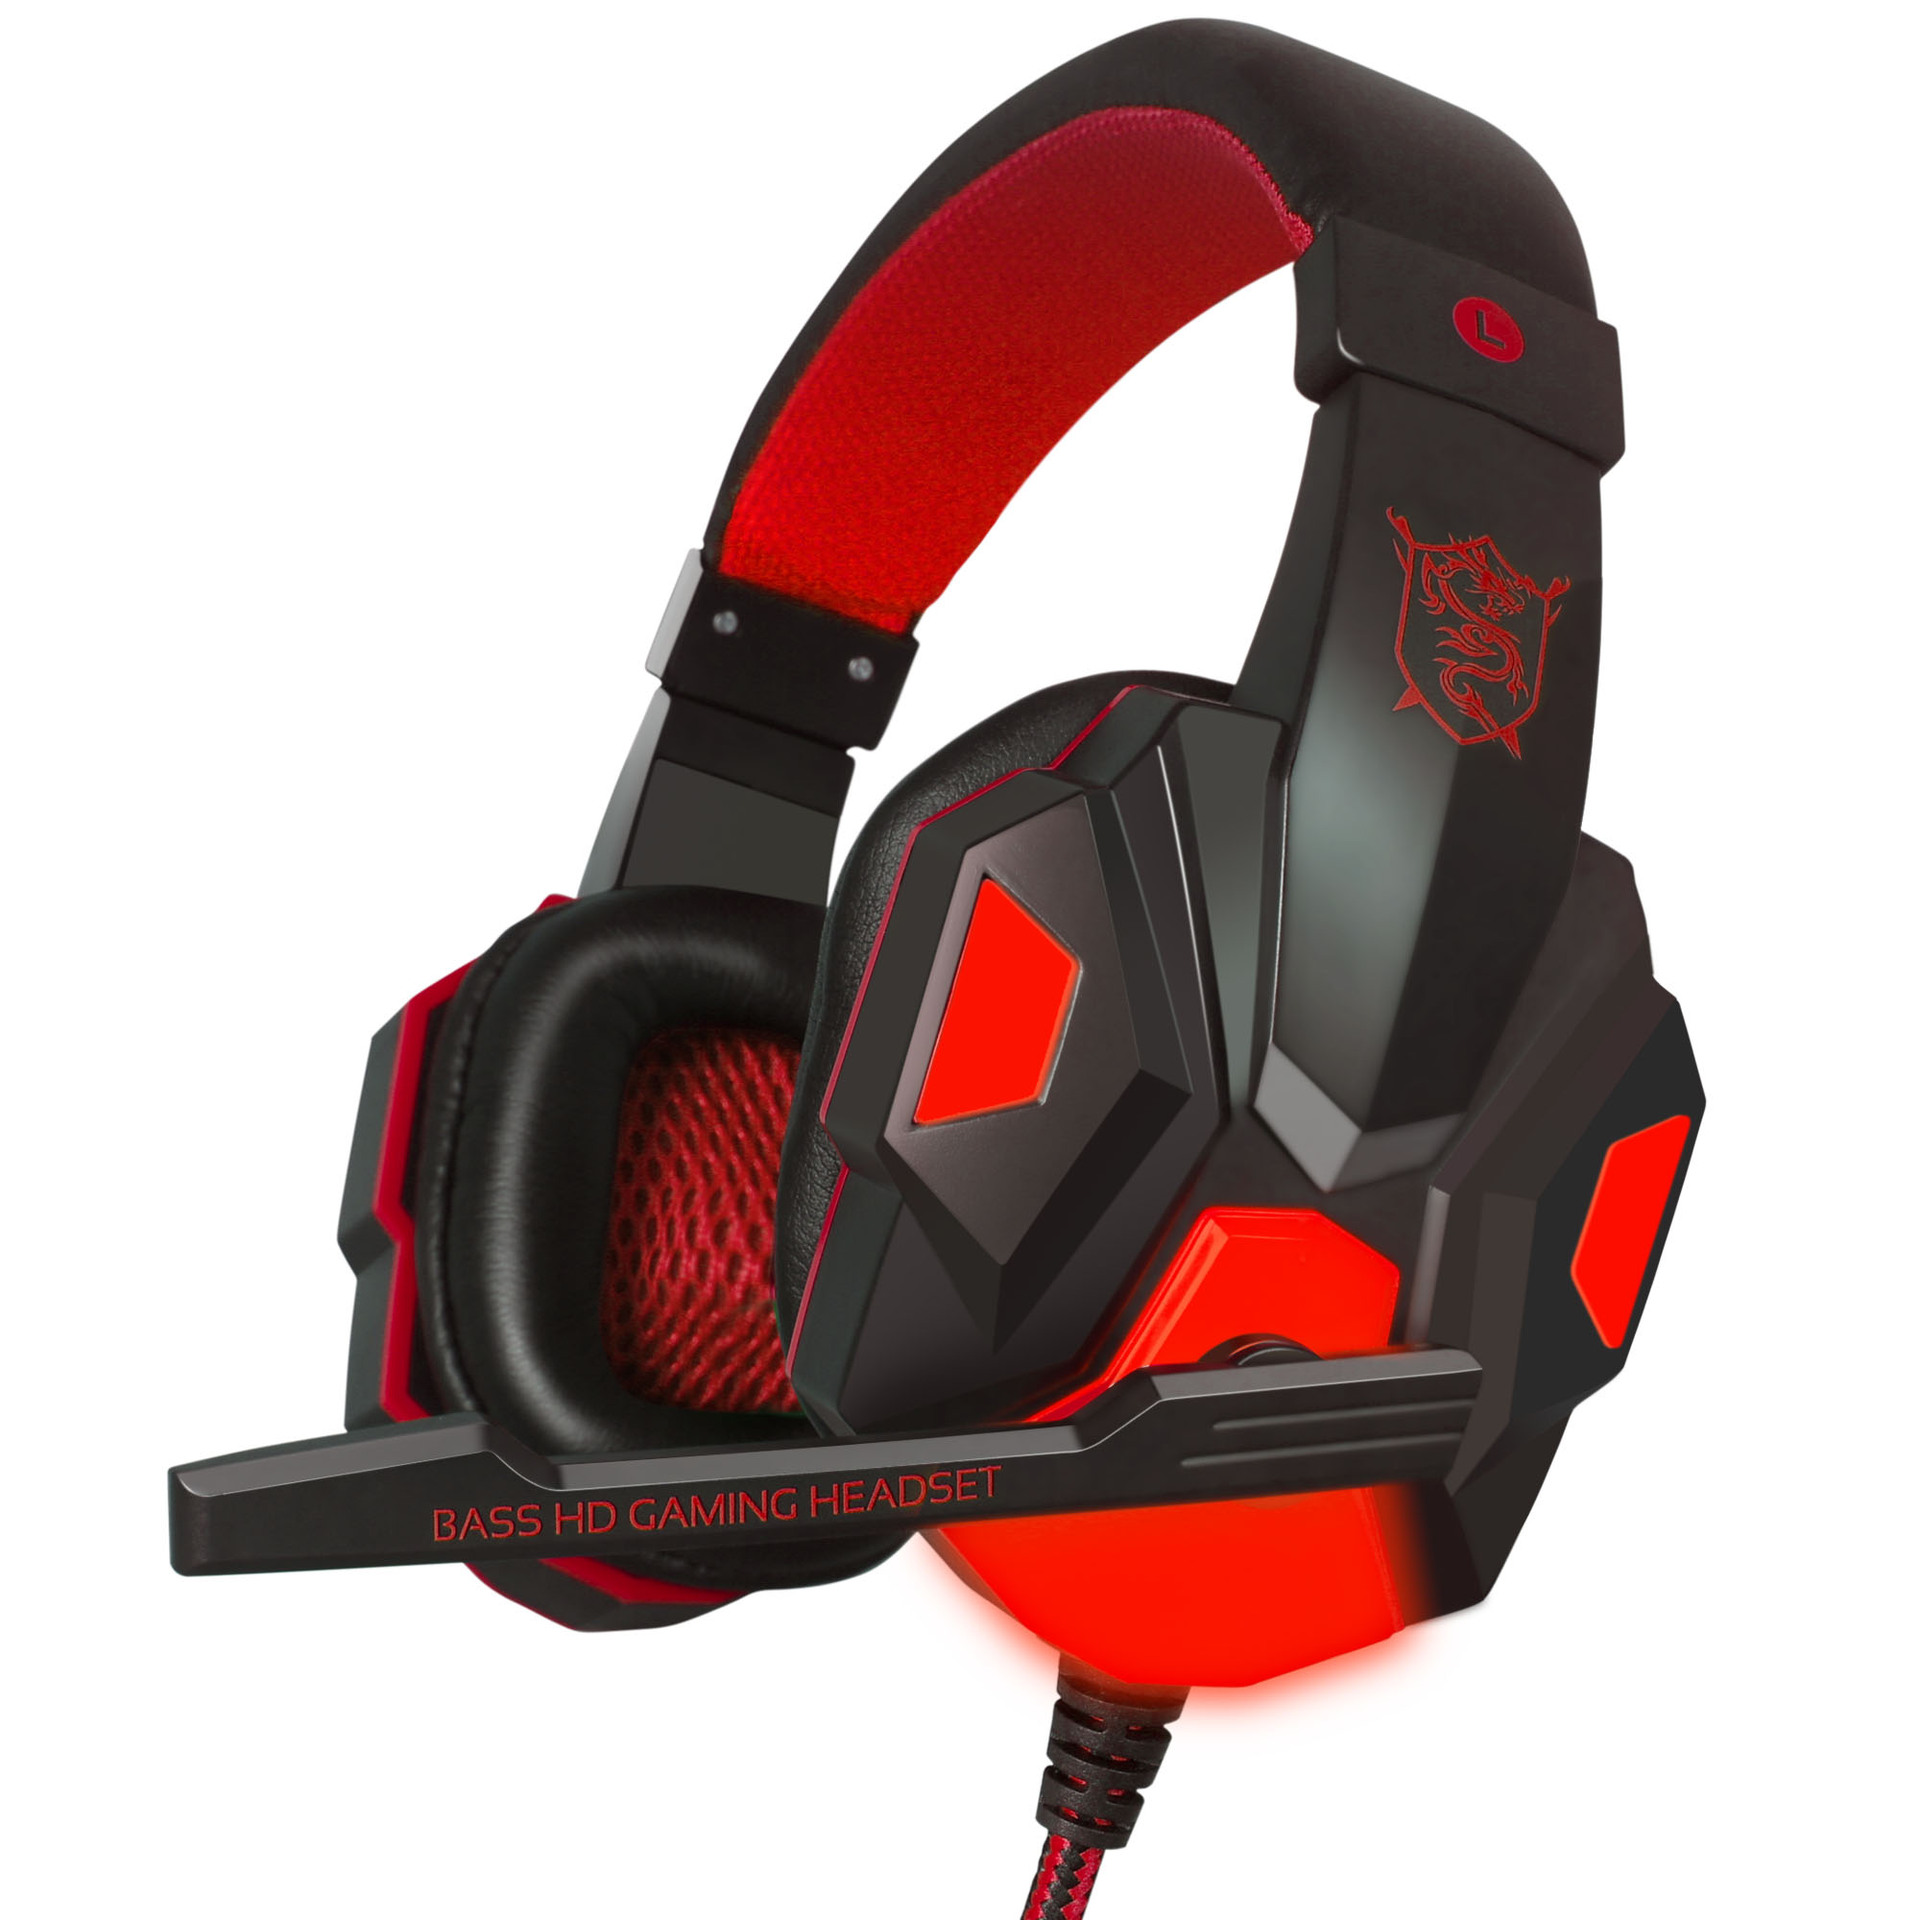 2.2M PC780 Gaming Headsets with Light Mic Stereo Earphones Deep Bass for PC Computer Gamer Laptop Black red does not shine